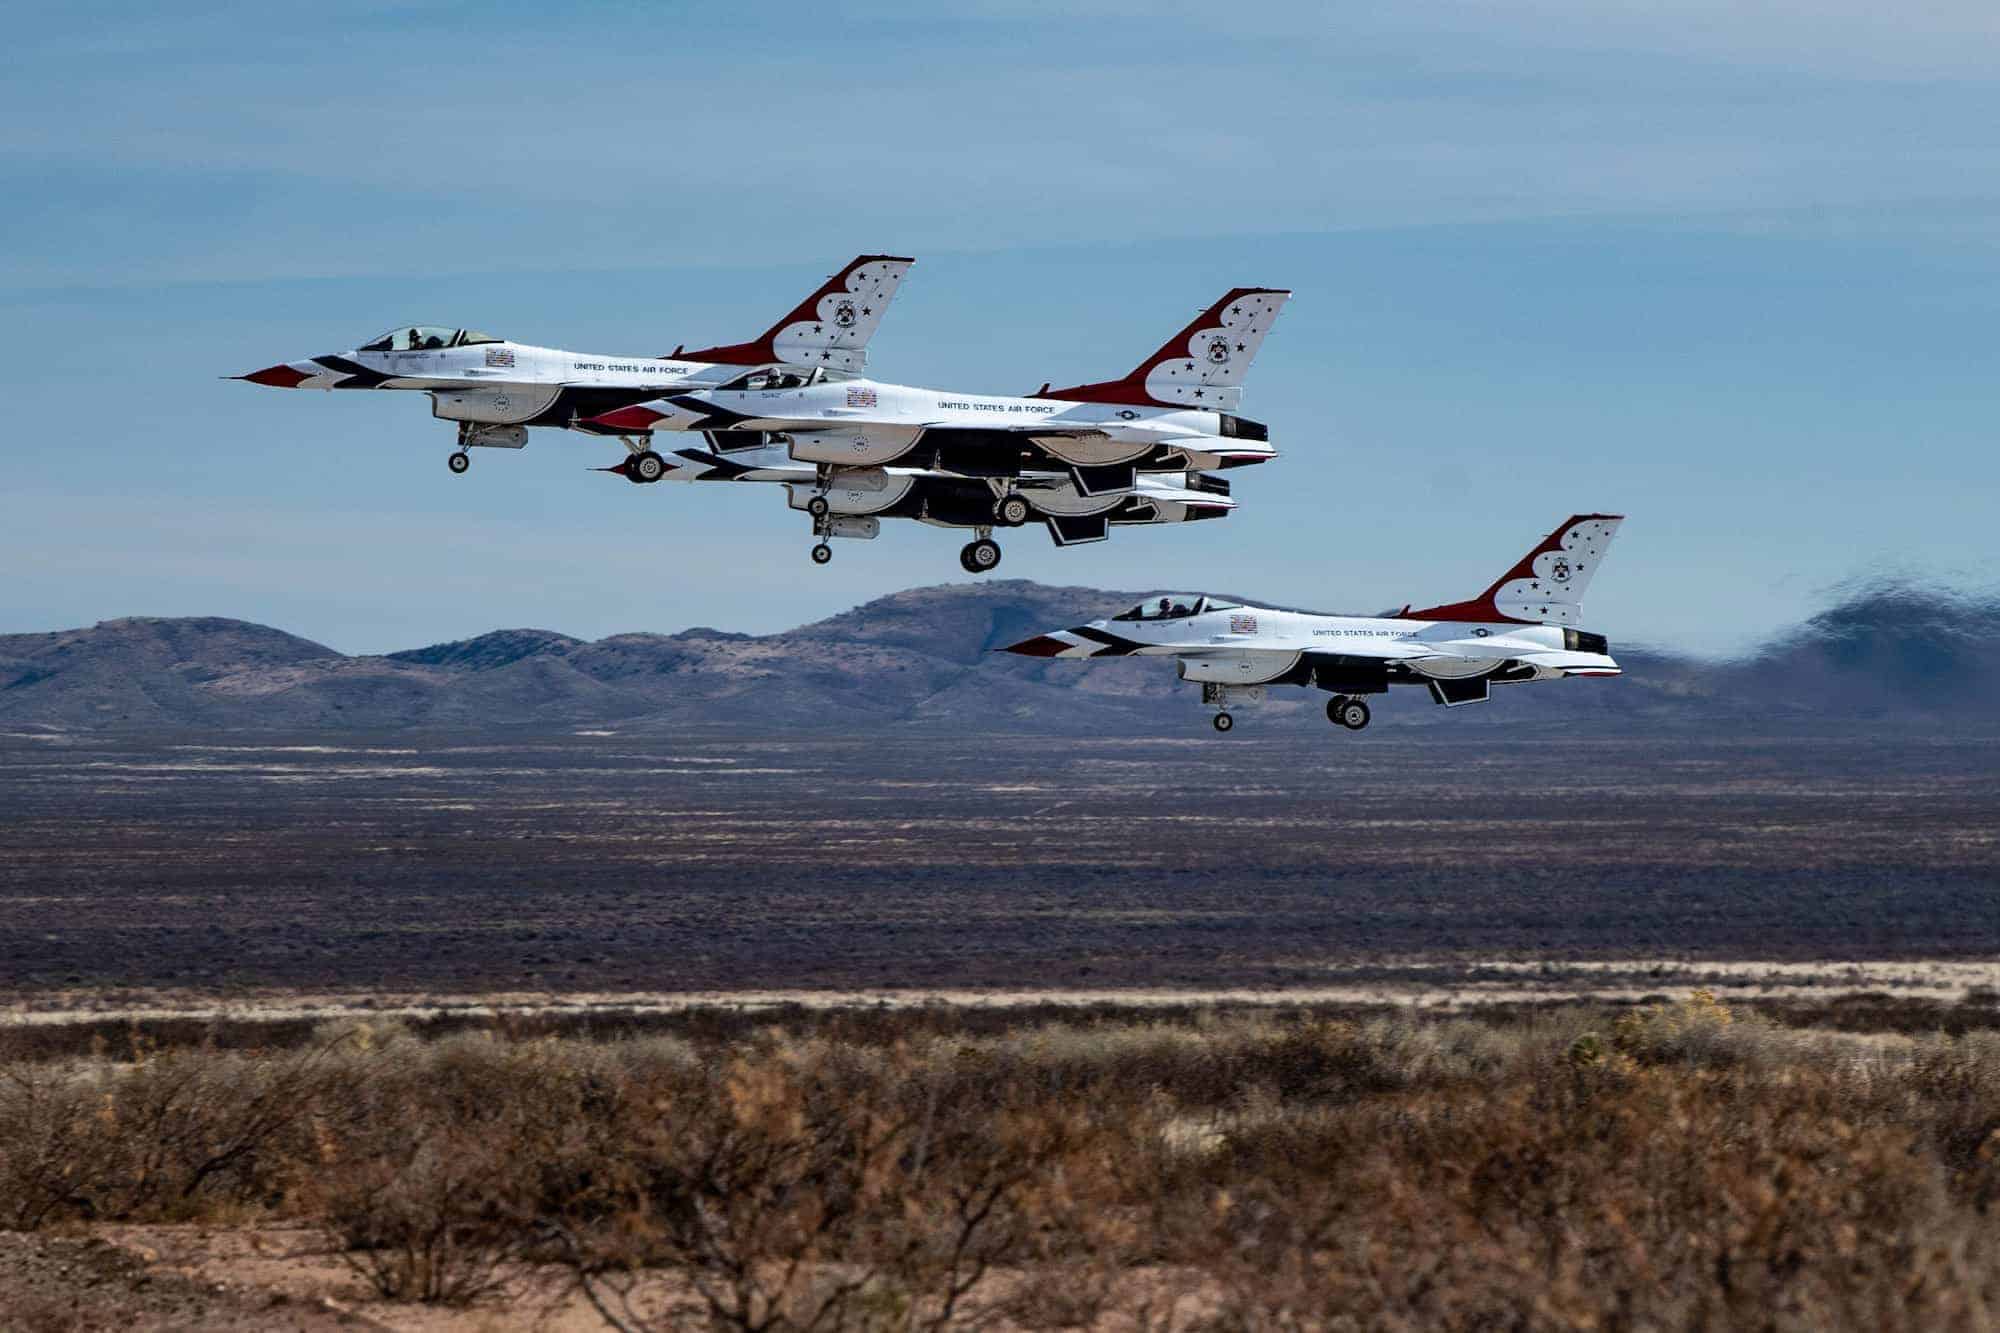 airforce thunderbirds training at spaceport america in new mexico